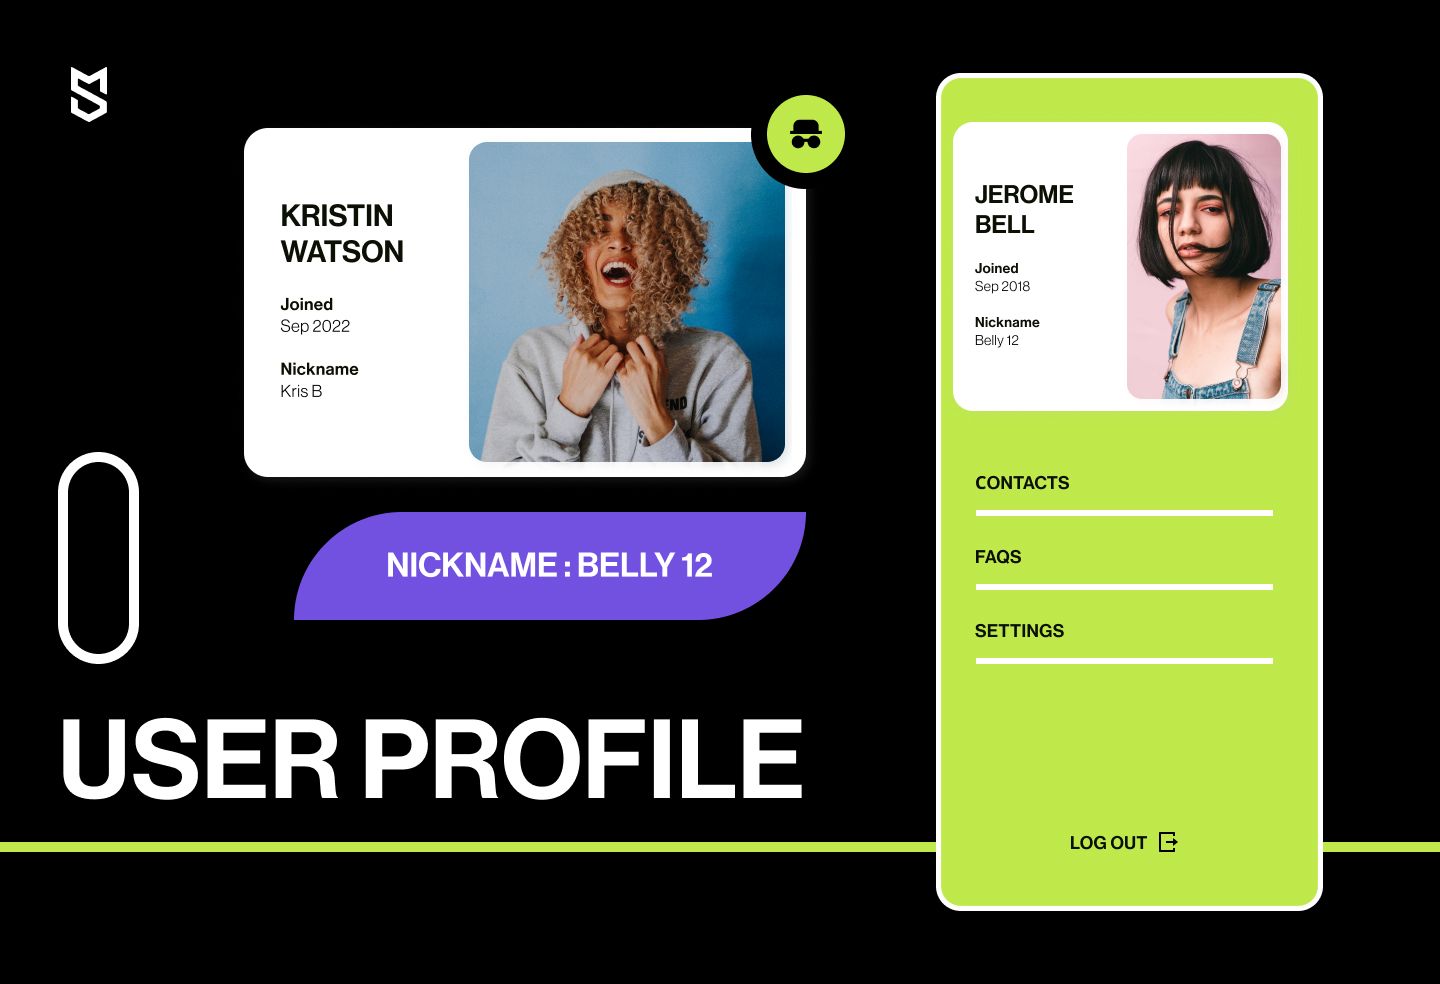 User profile in a secure messaging app